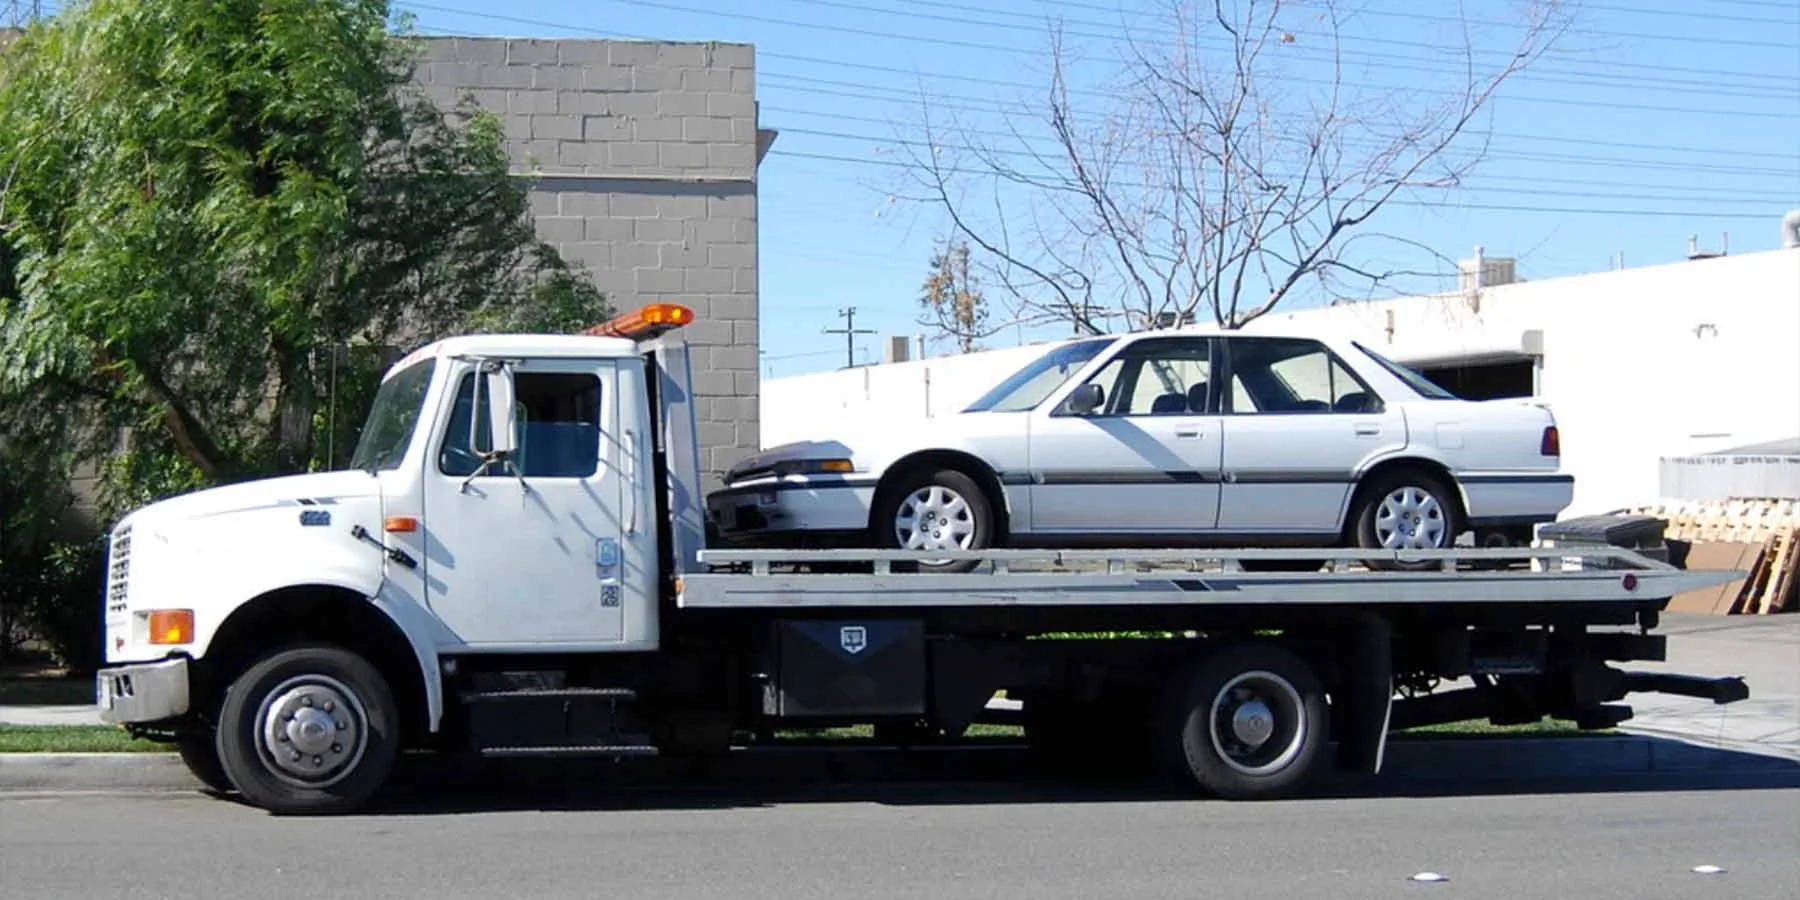 Towing company